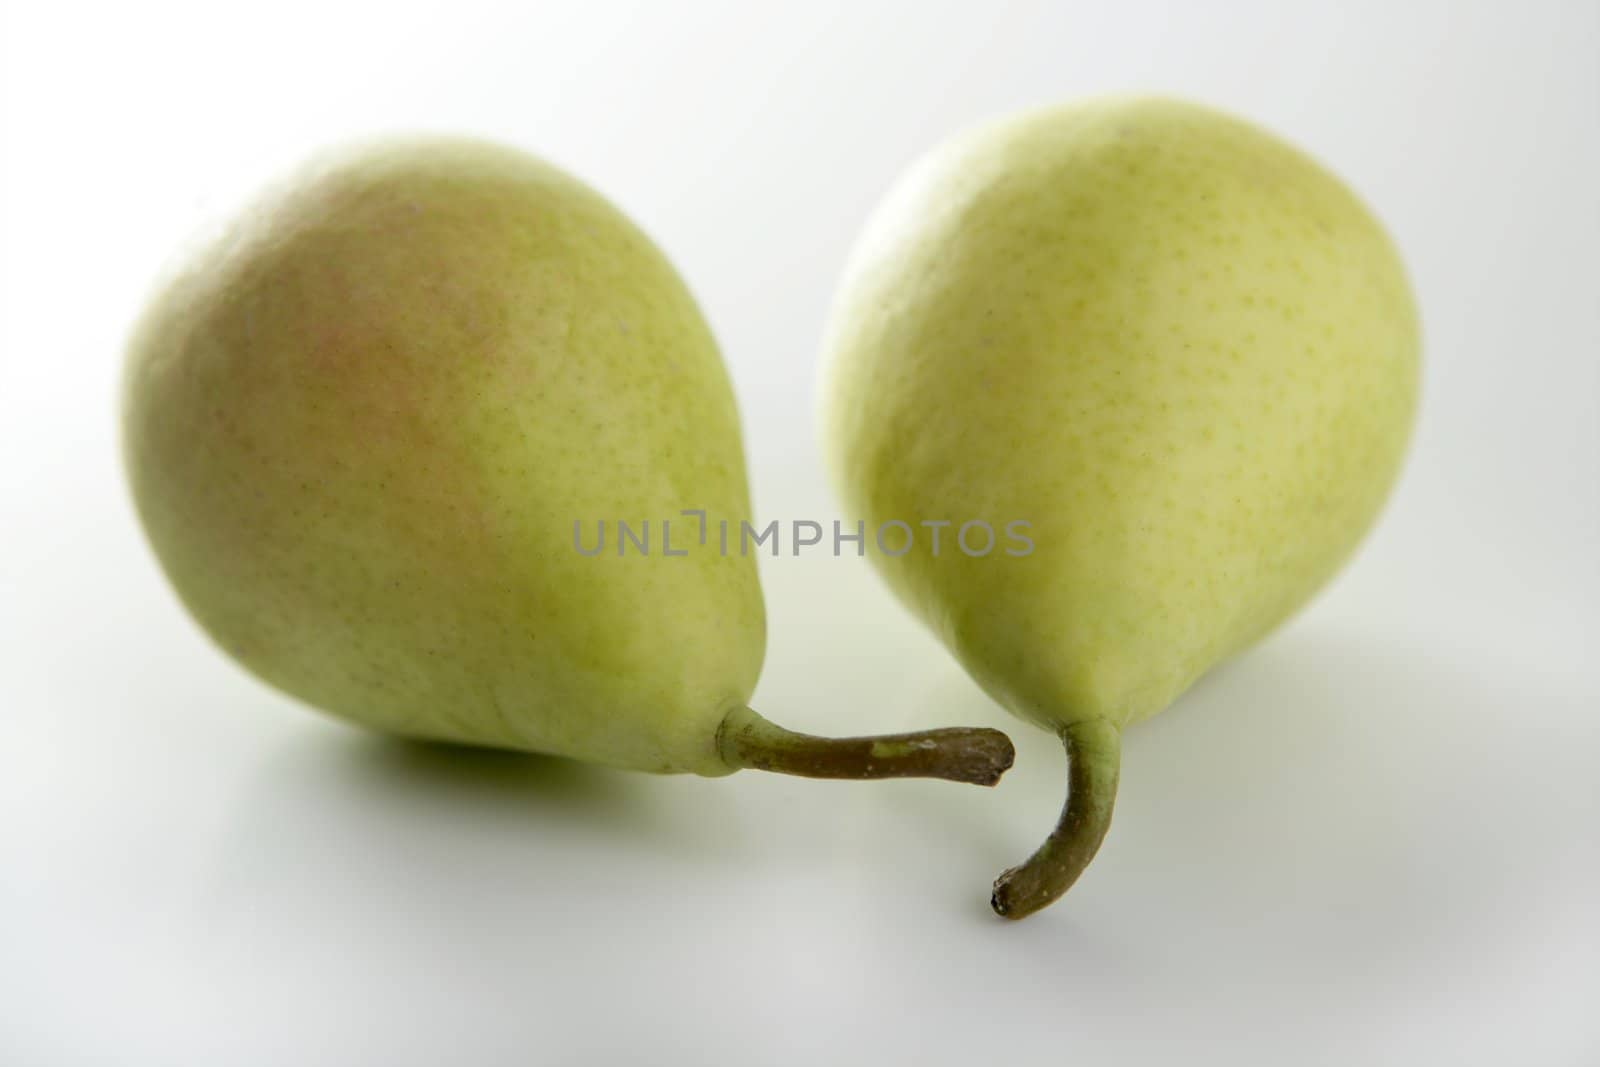 Pears over white background by lunamarina